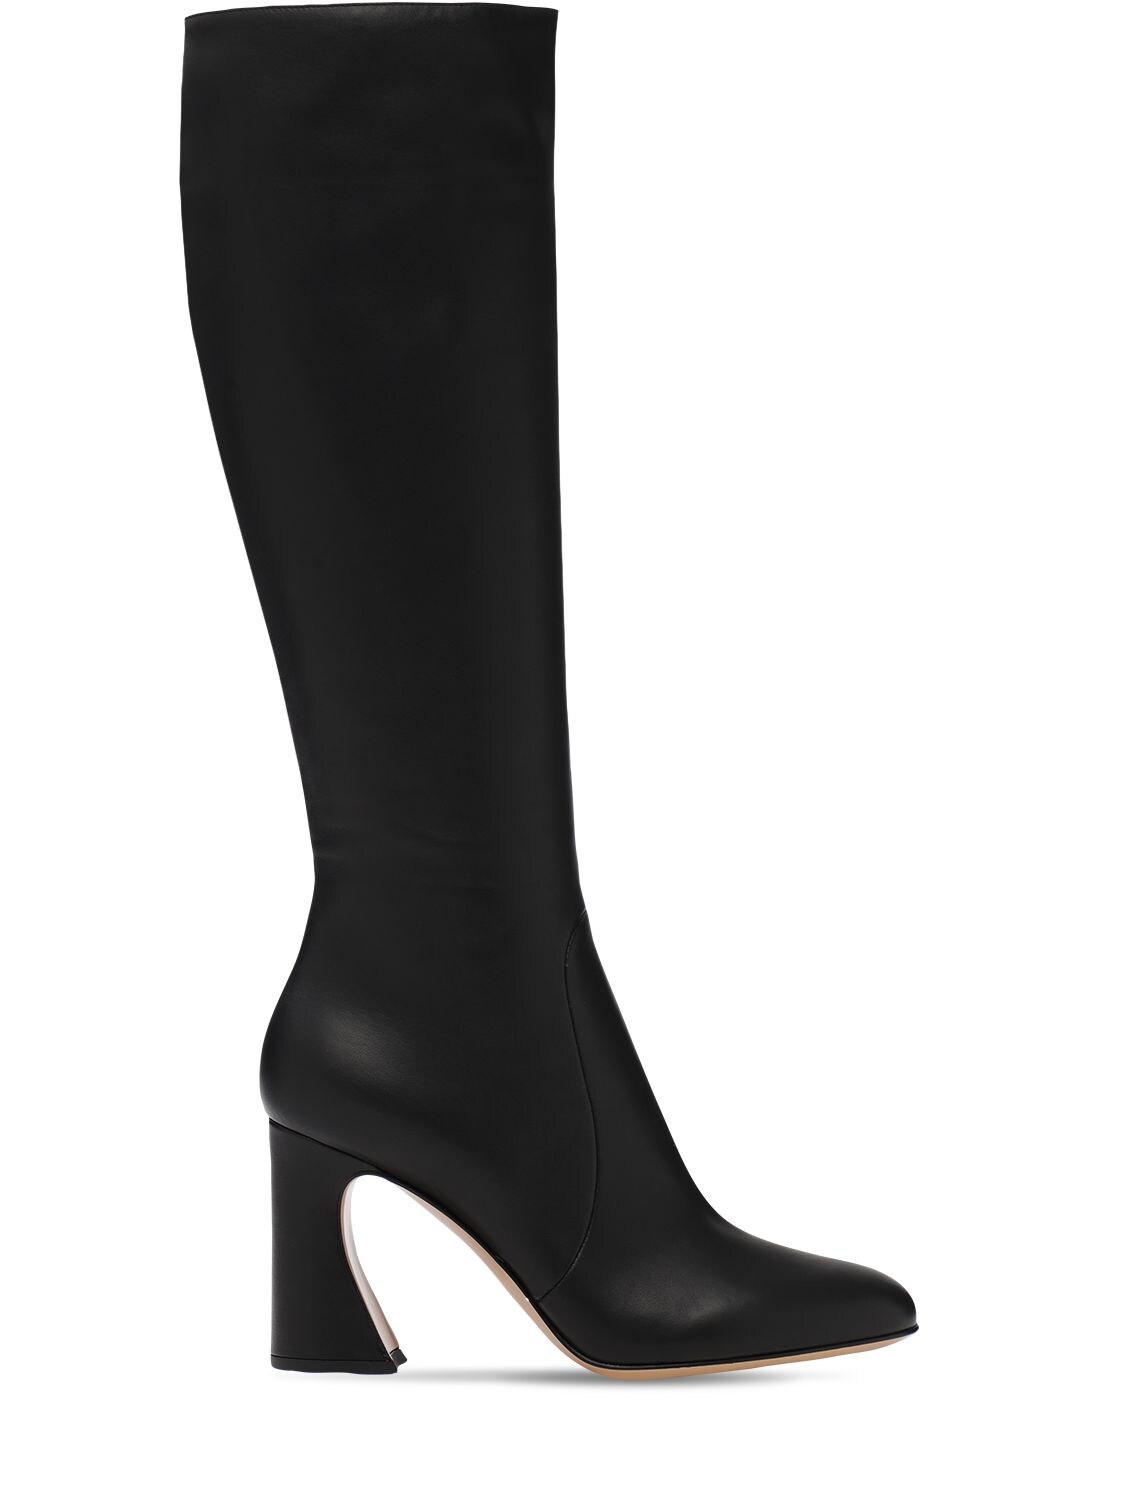 85mm Leather Tall Boots